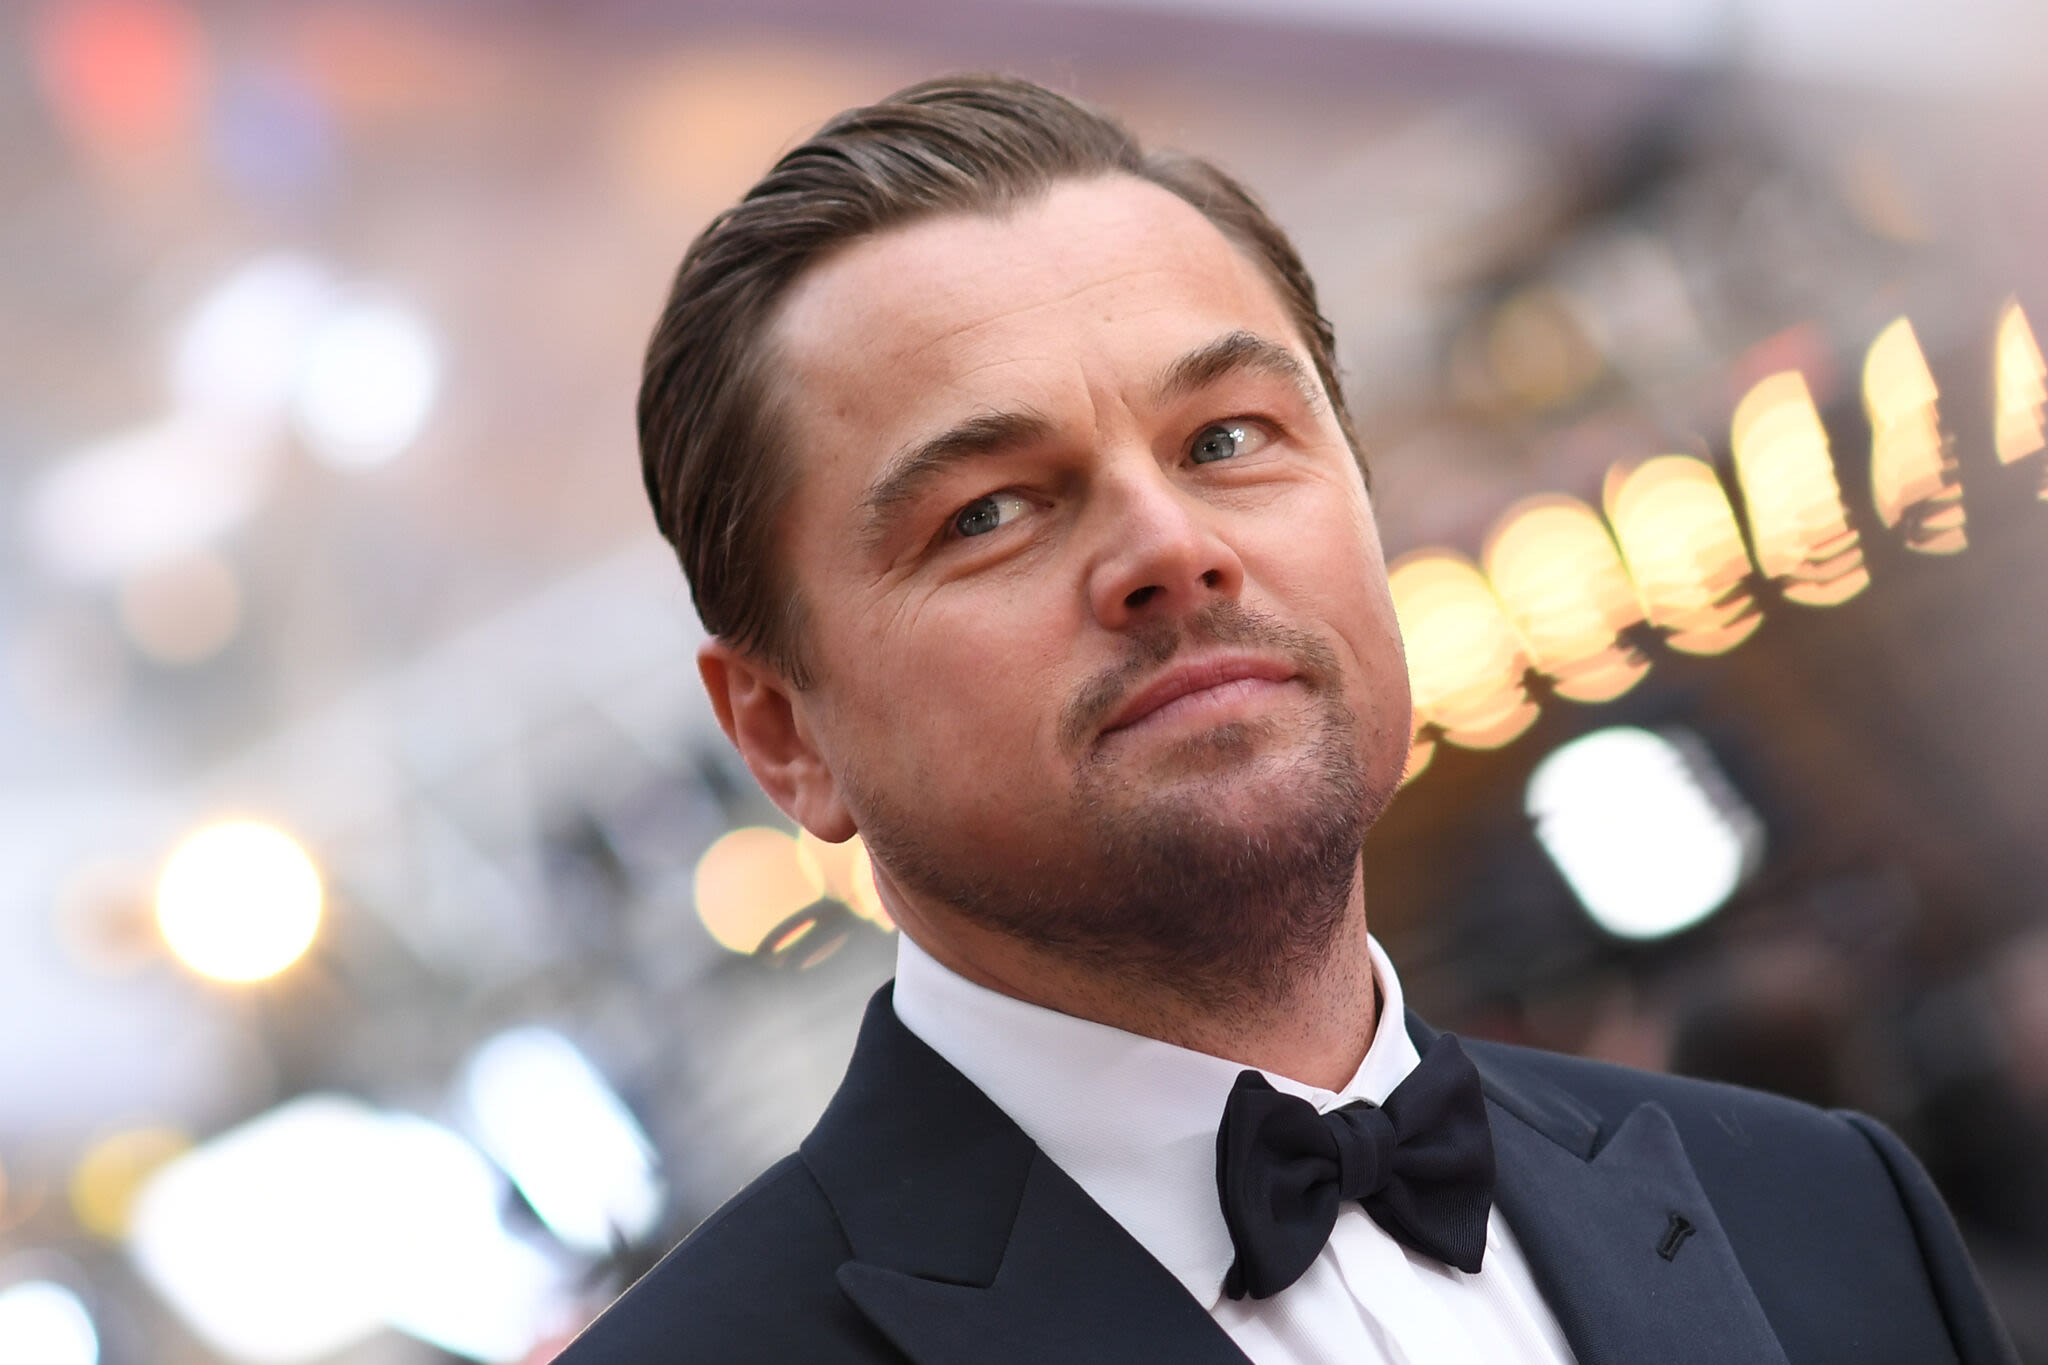 Leo DiCaprio's new NorCal movie adds another big name